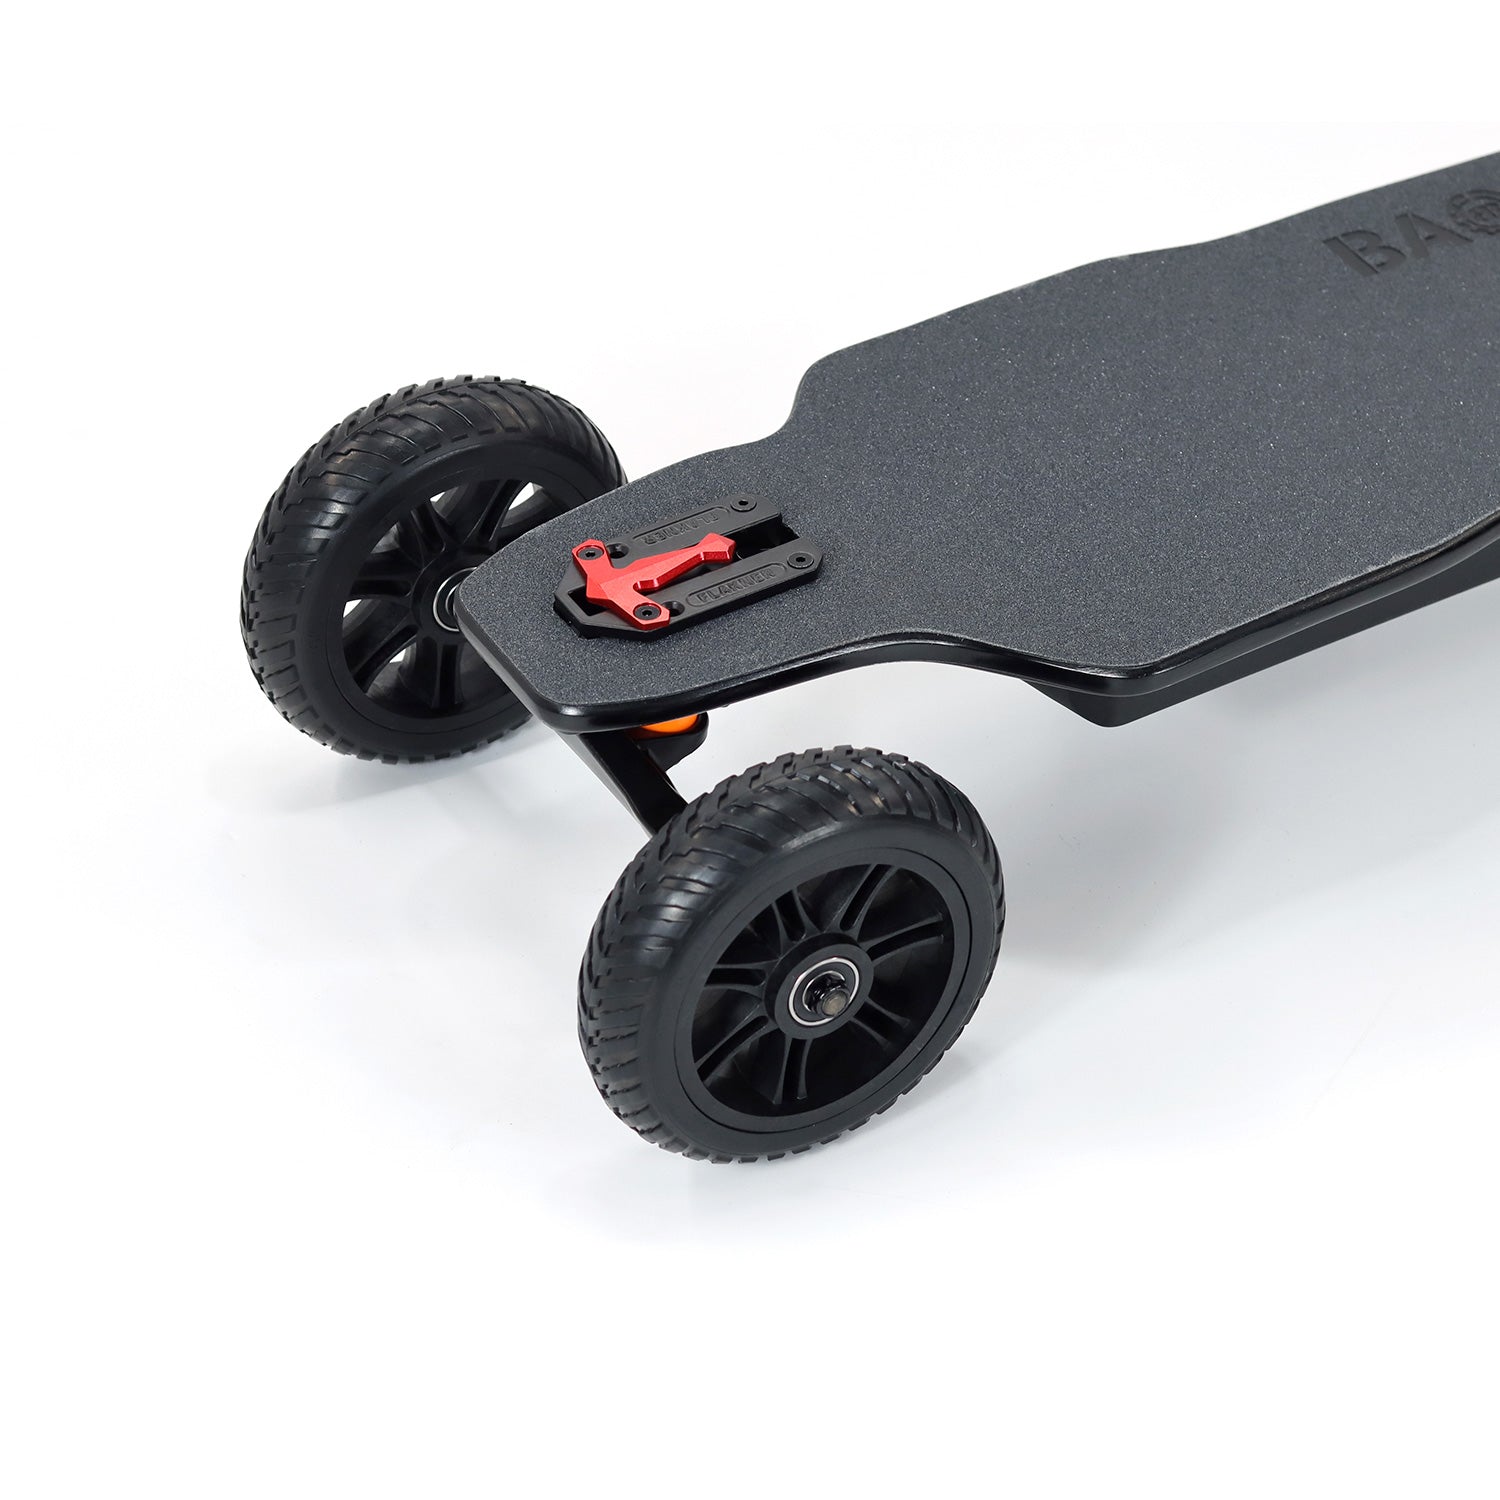 Backfire Ranger X2 All Terrain Electric Skateboard with 1200W X2 Ultra High Power Ultra High Torque Motors and 12S High Voltage High Efficiency Electronic System